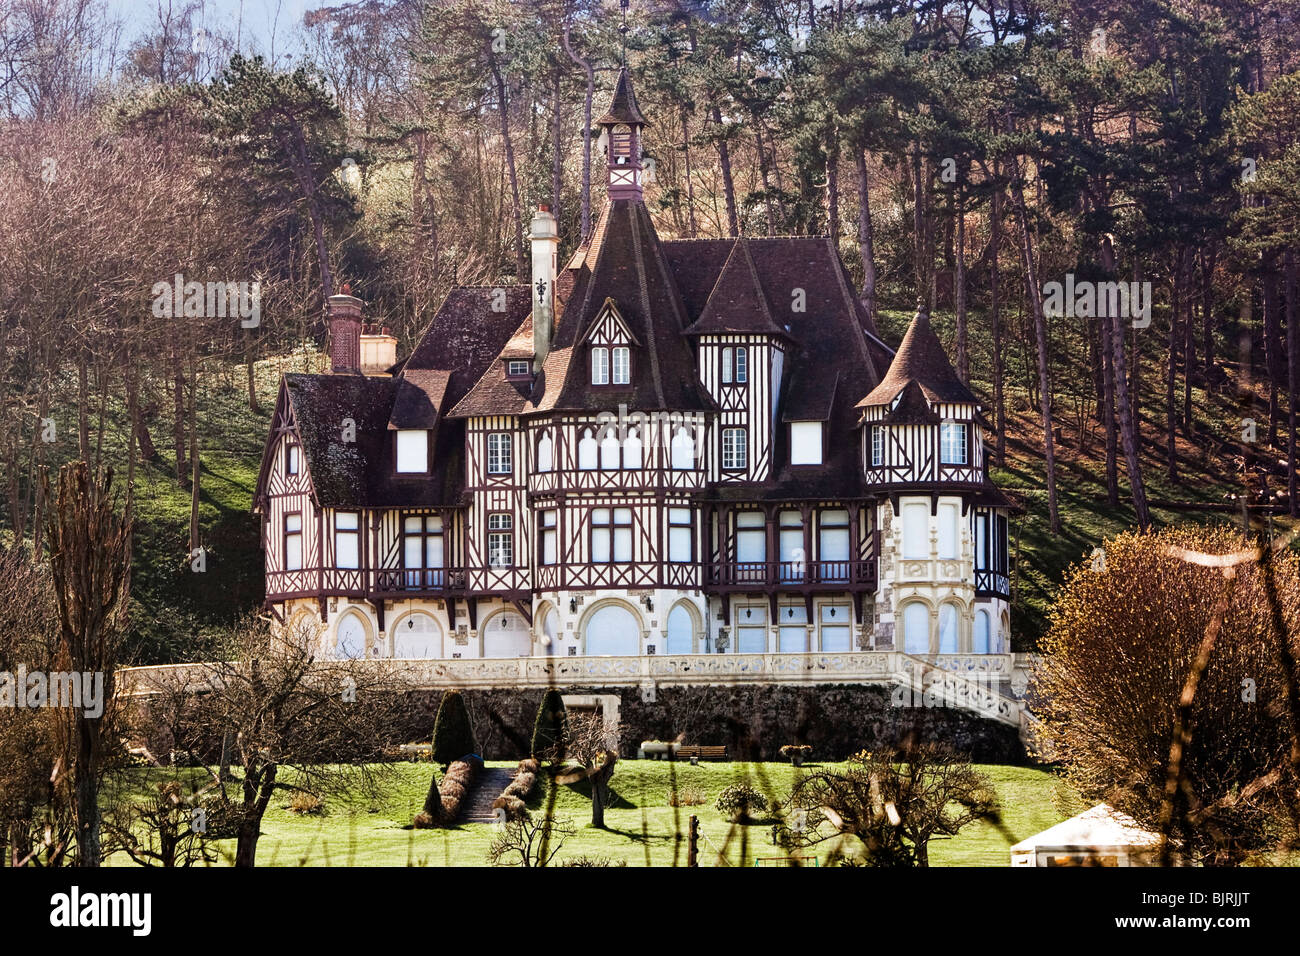 Französisches Chateau - traditionelle Country Manor House, Pays d'Auge, Normandie, Frankreich Stockfoto